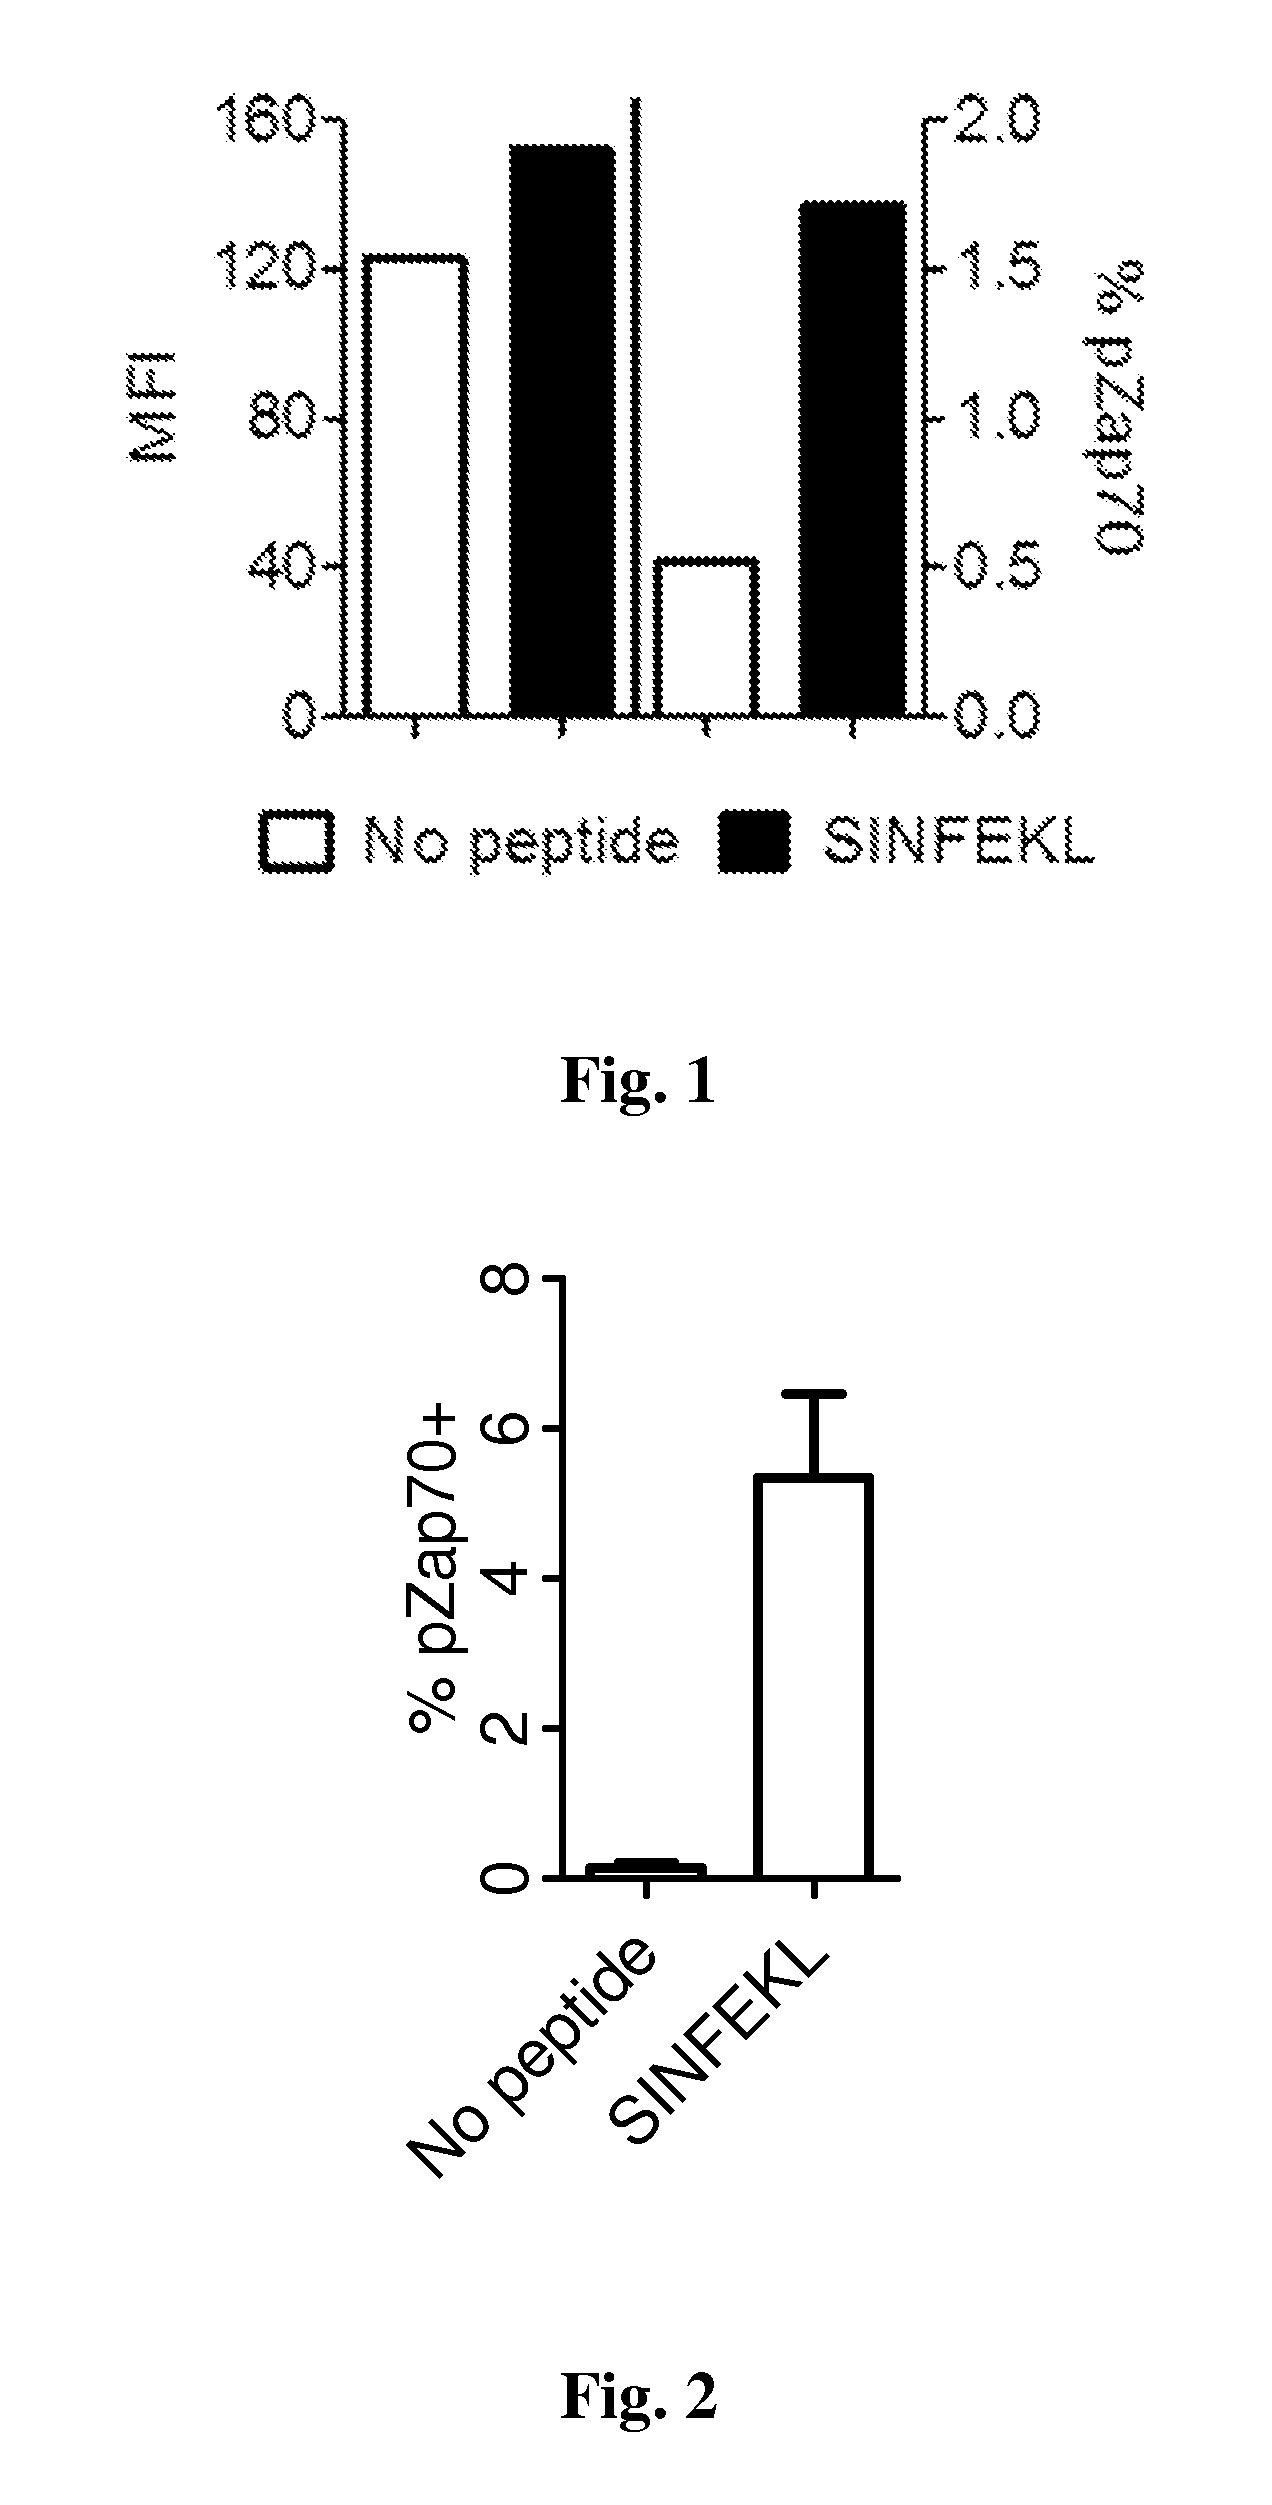 Compositions and methods related to induced tolerogenic dendritic cells externally loaded with mhc class i-restricted epitopes